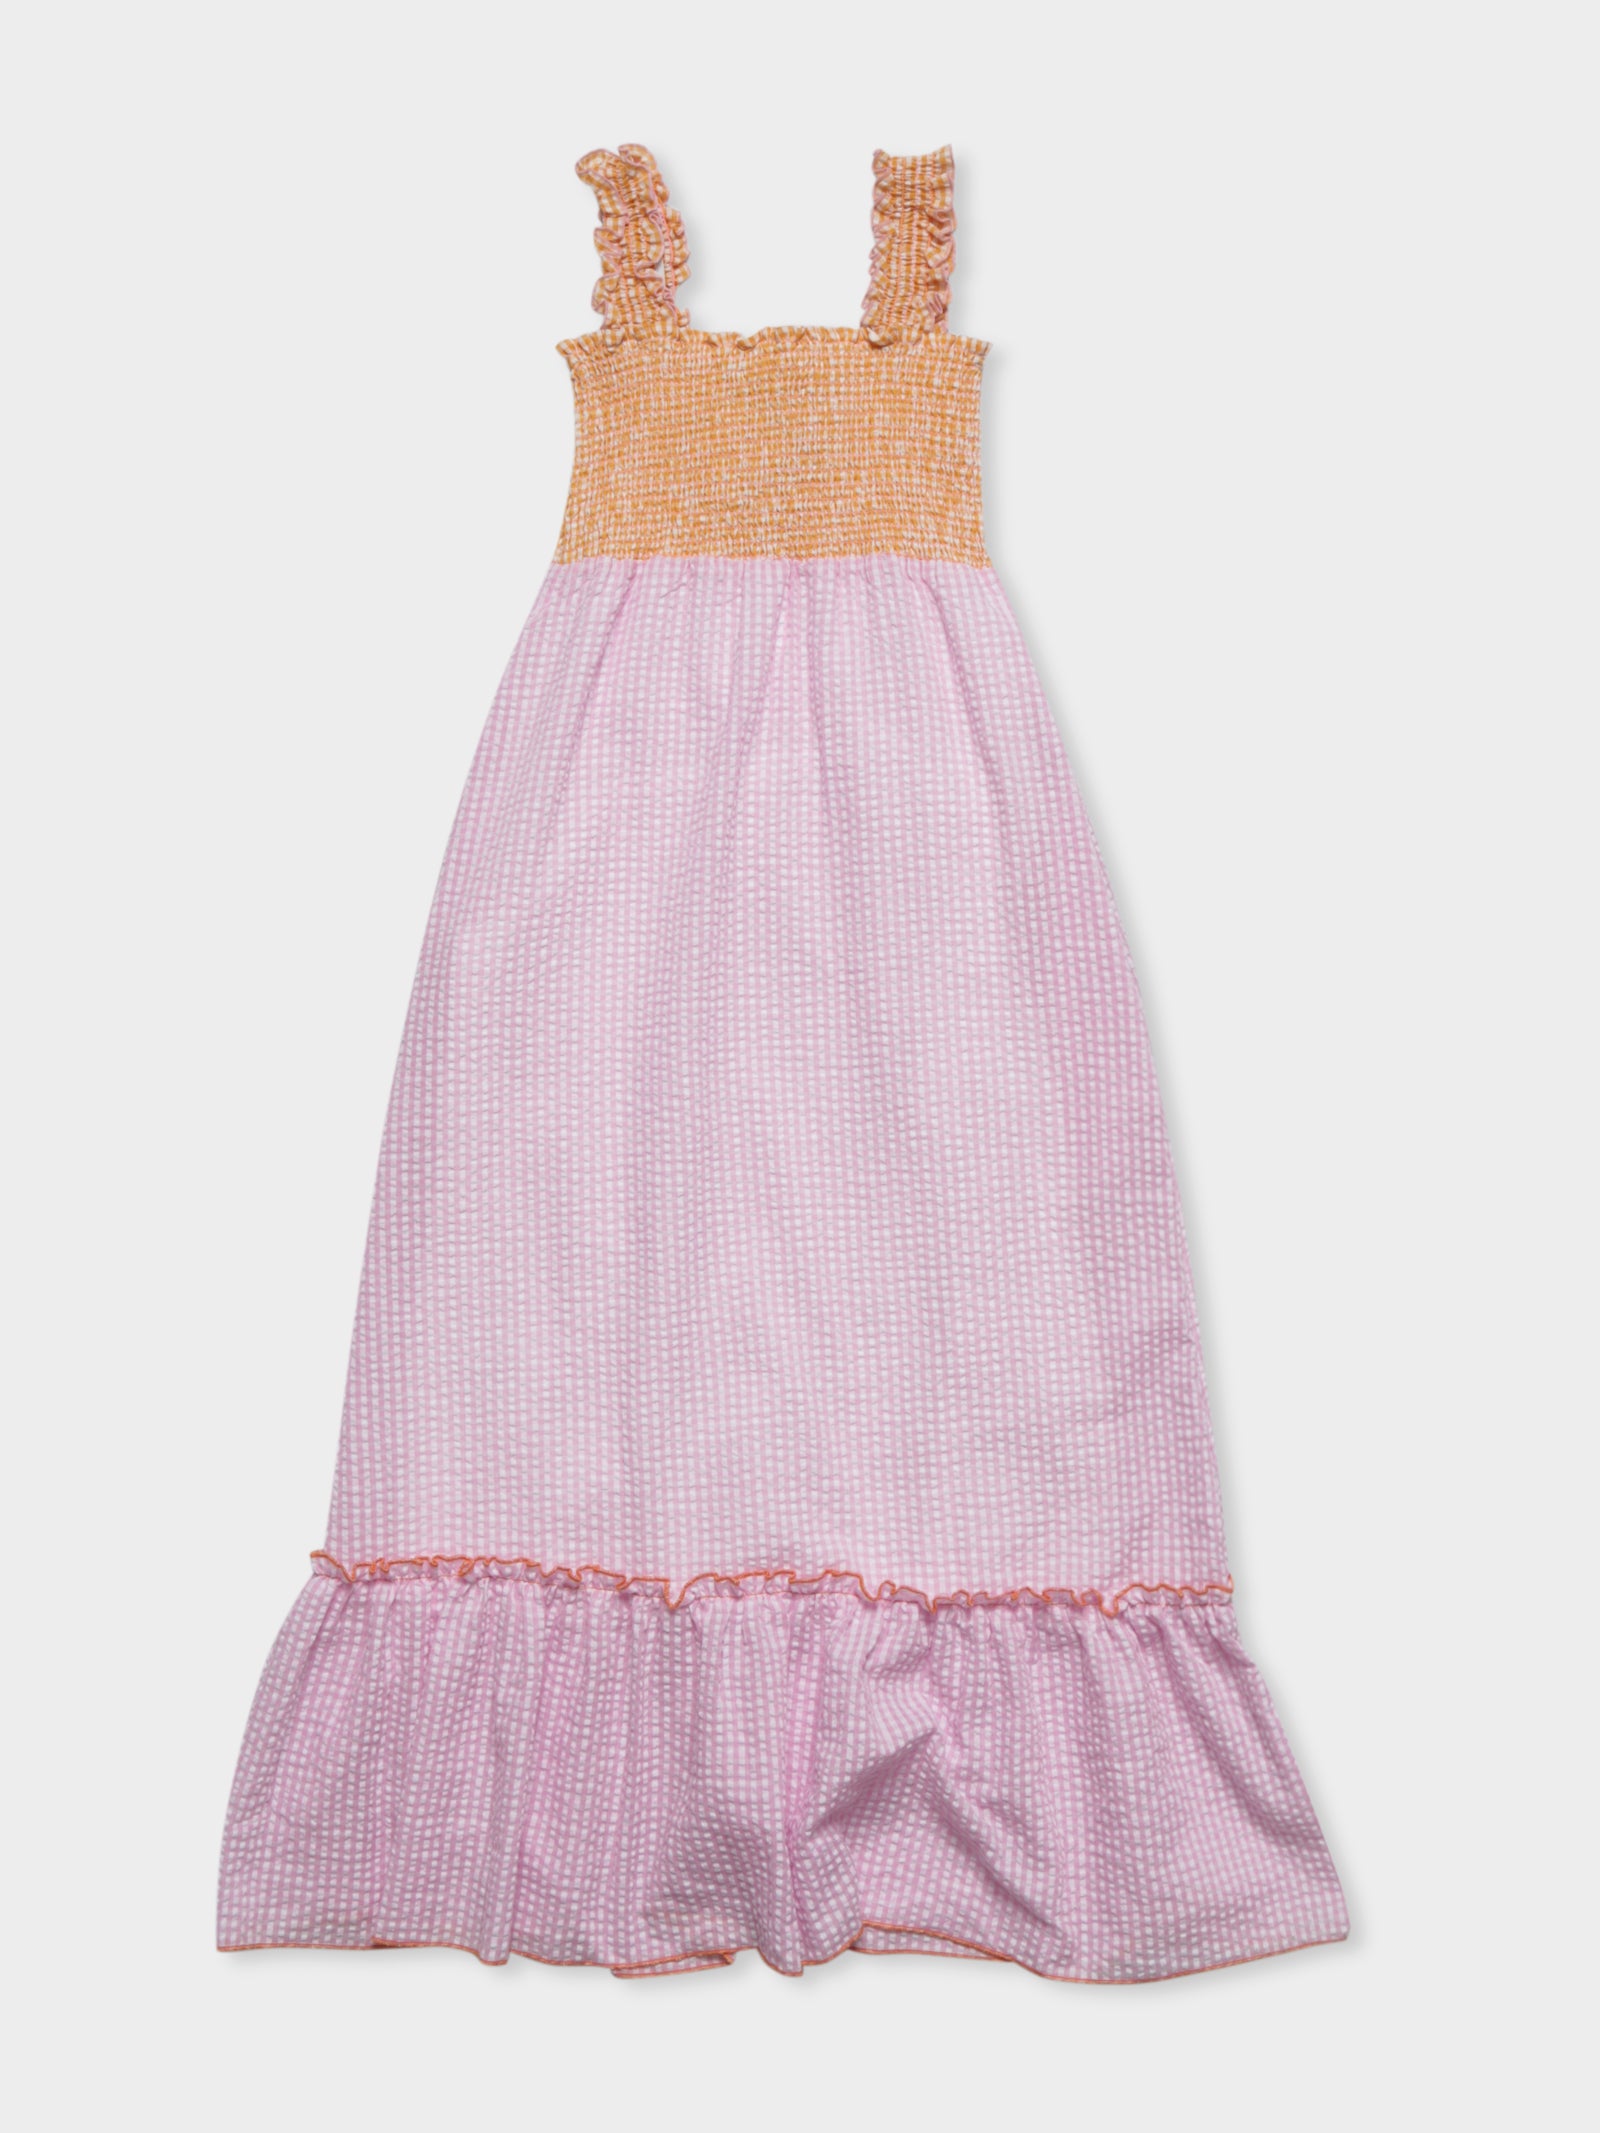 Clyde Dress in Mixed Gingham